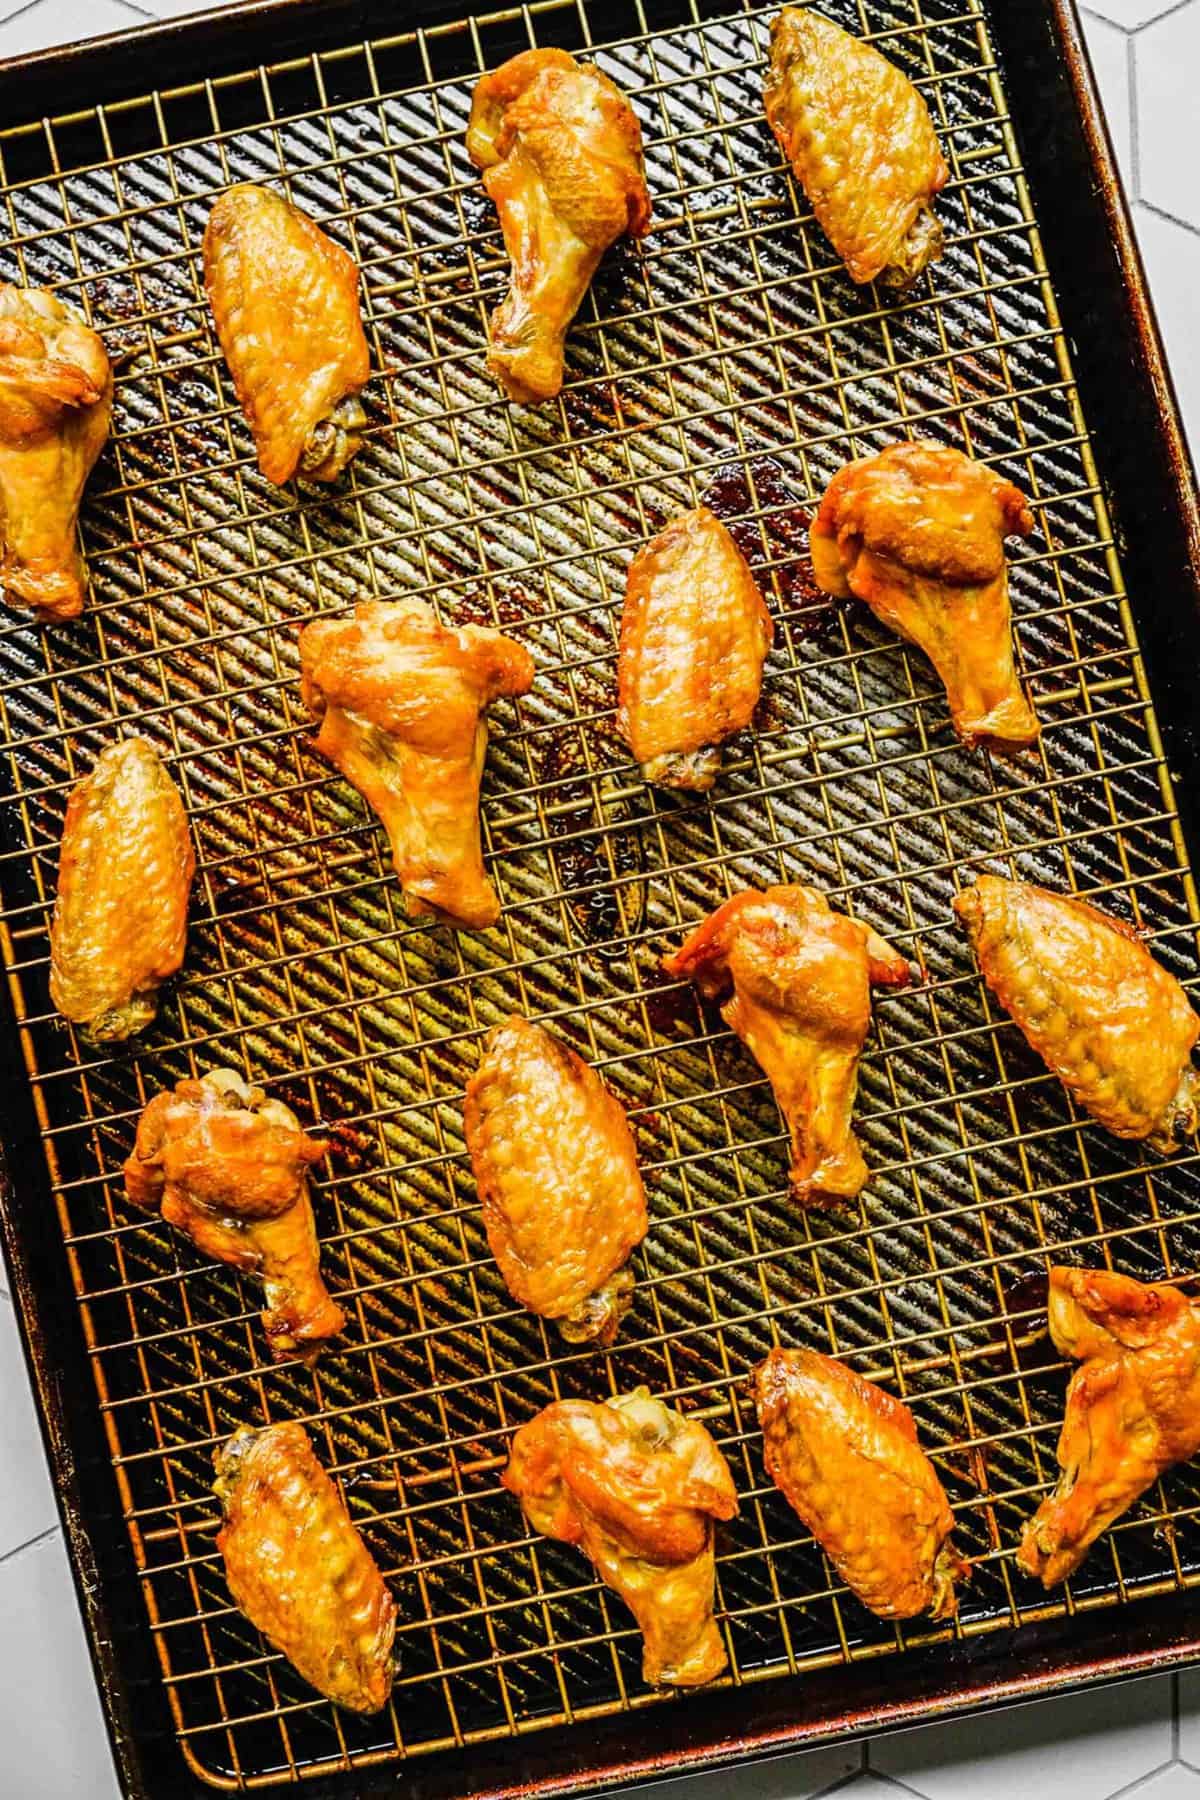 Lemon pepper chicken wings on a cooling wrack over a baking tray.